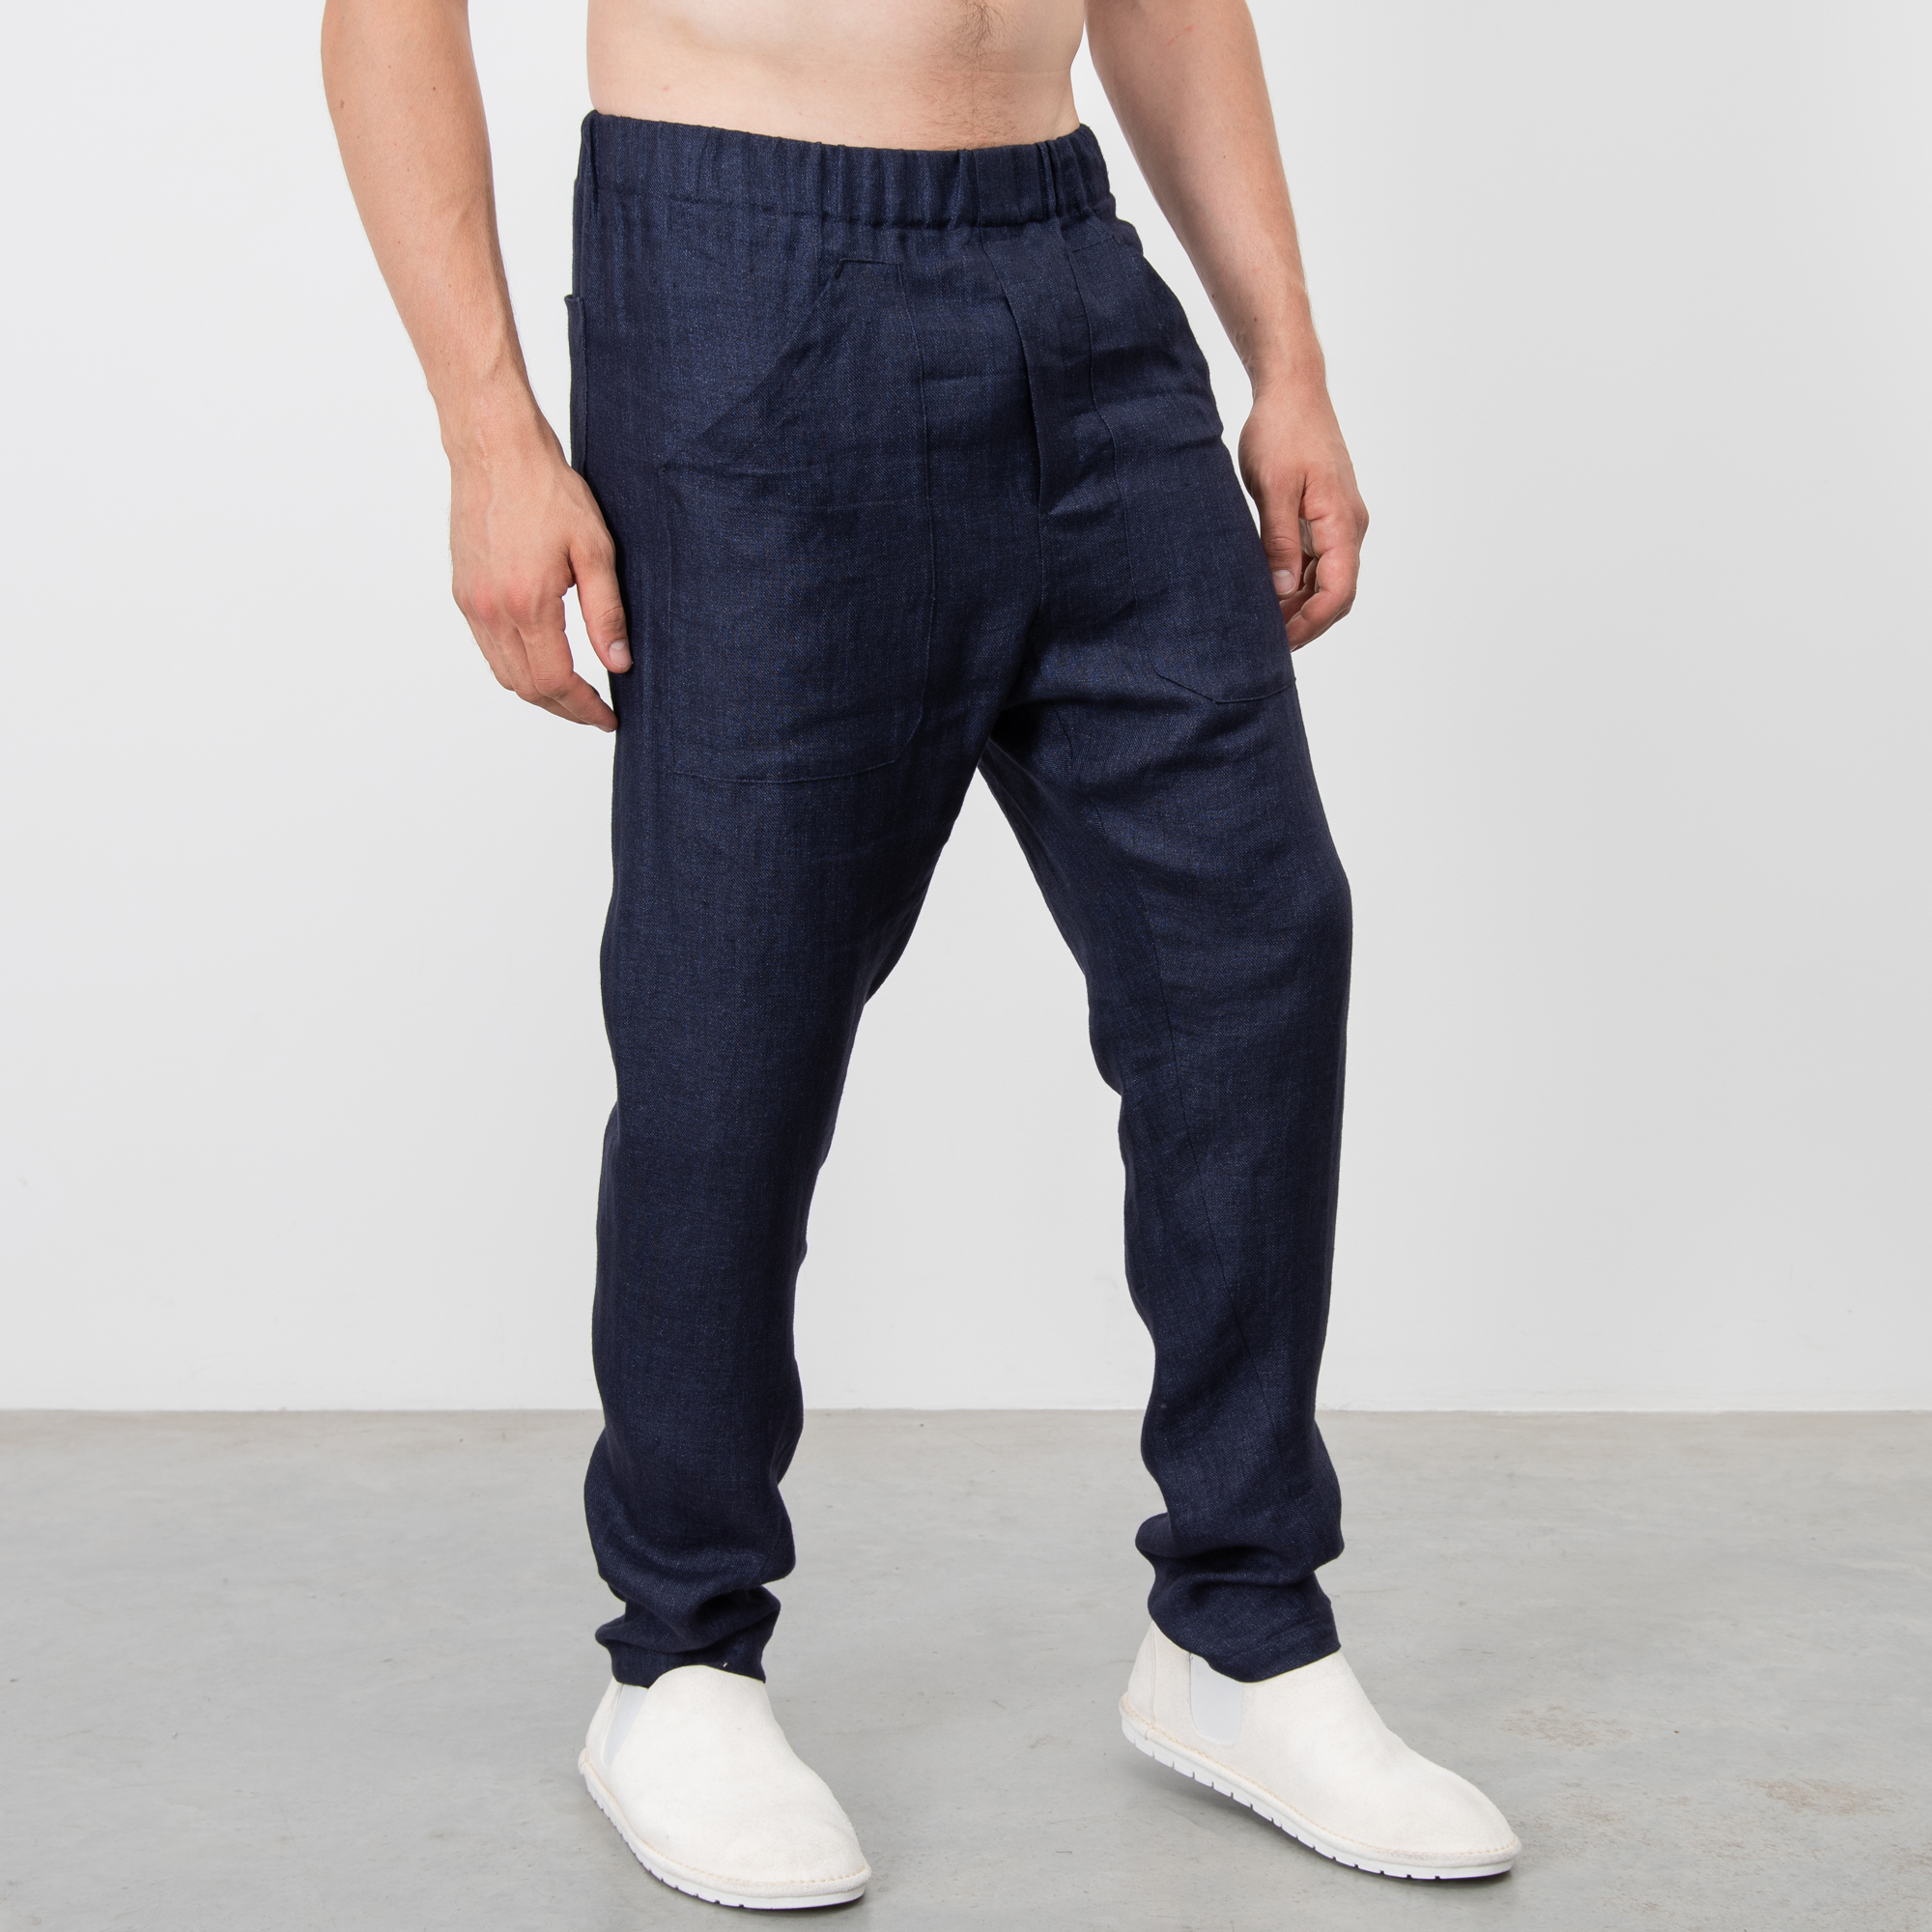 SHINY NAVY BAGGY PANTS|wolfensson